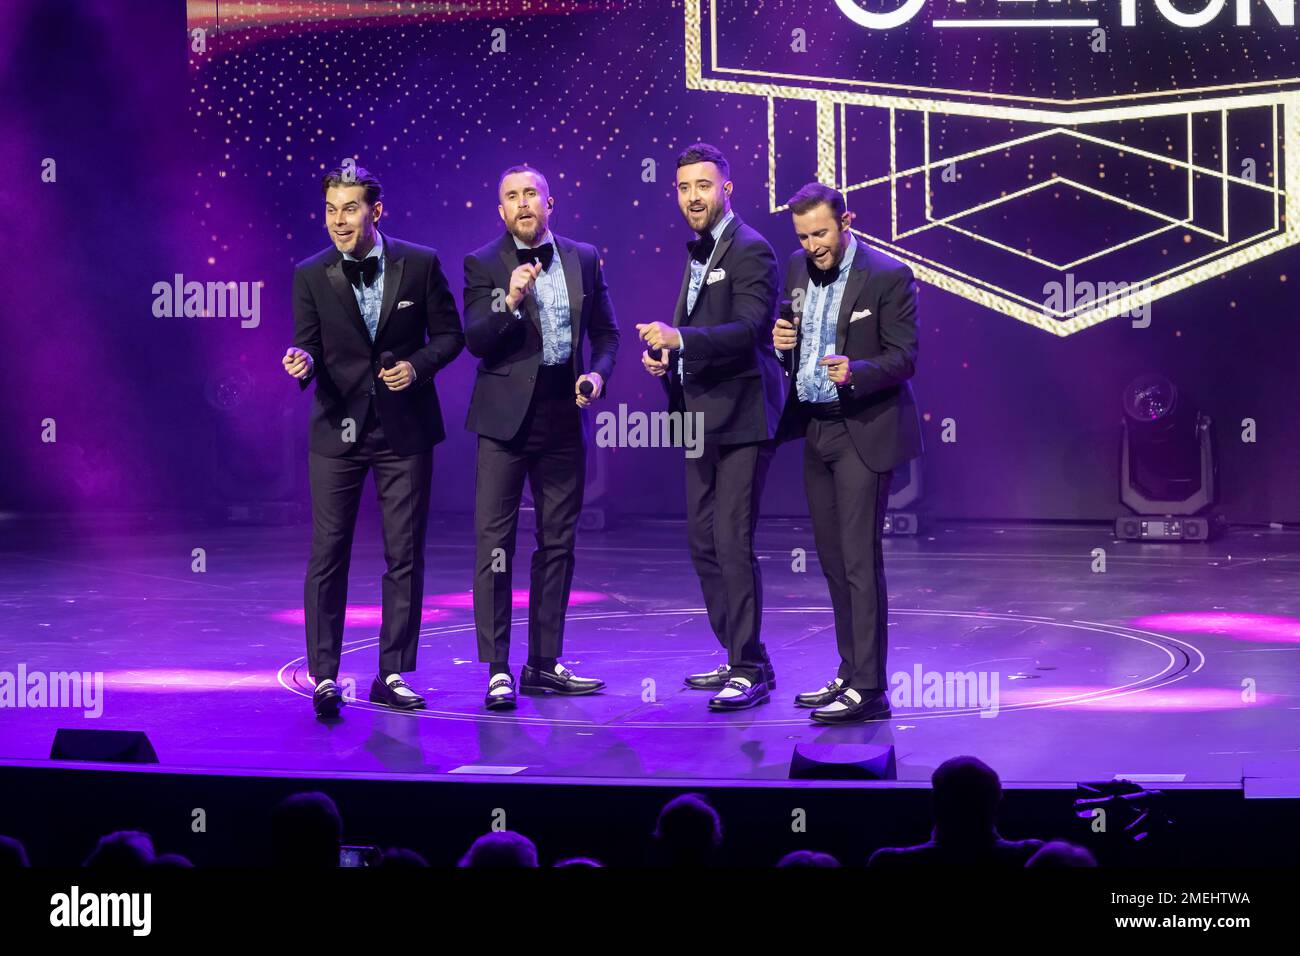 The Overtones, Vocal harmony group with performing on P&O Arvia Stock Photo